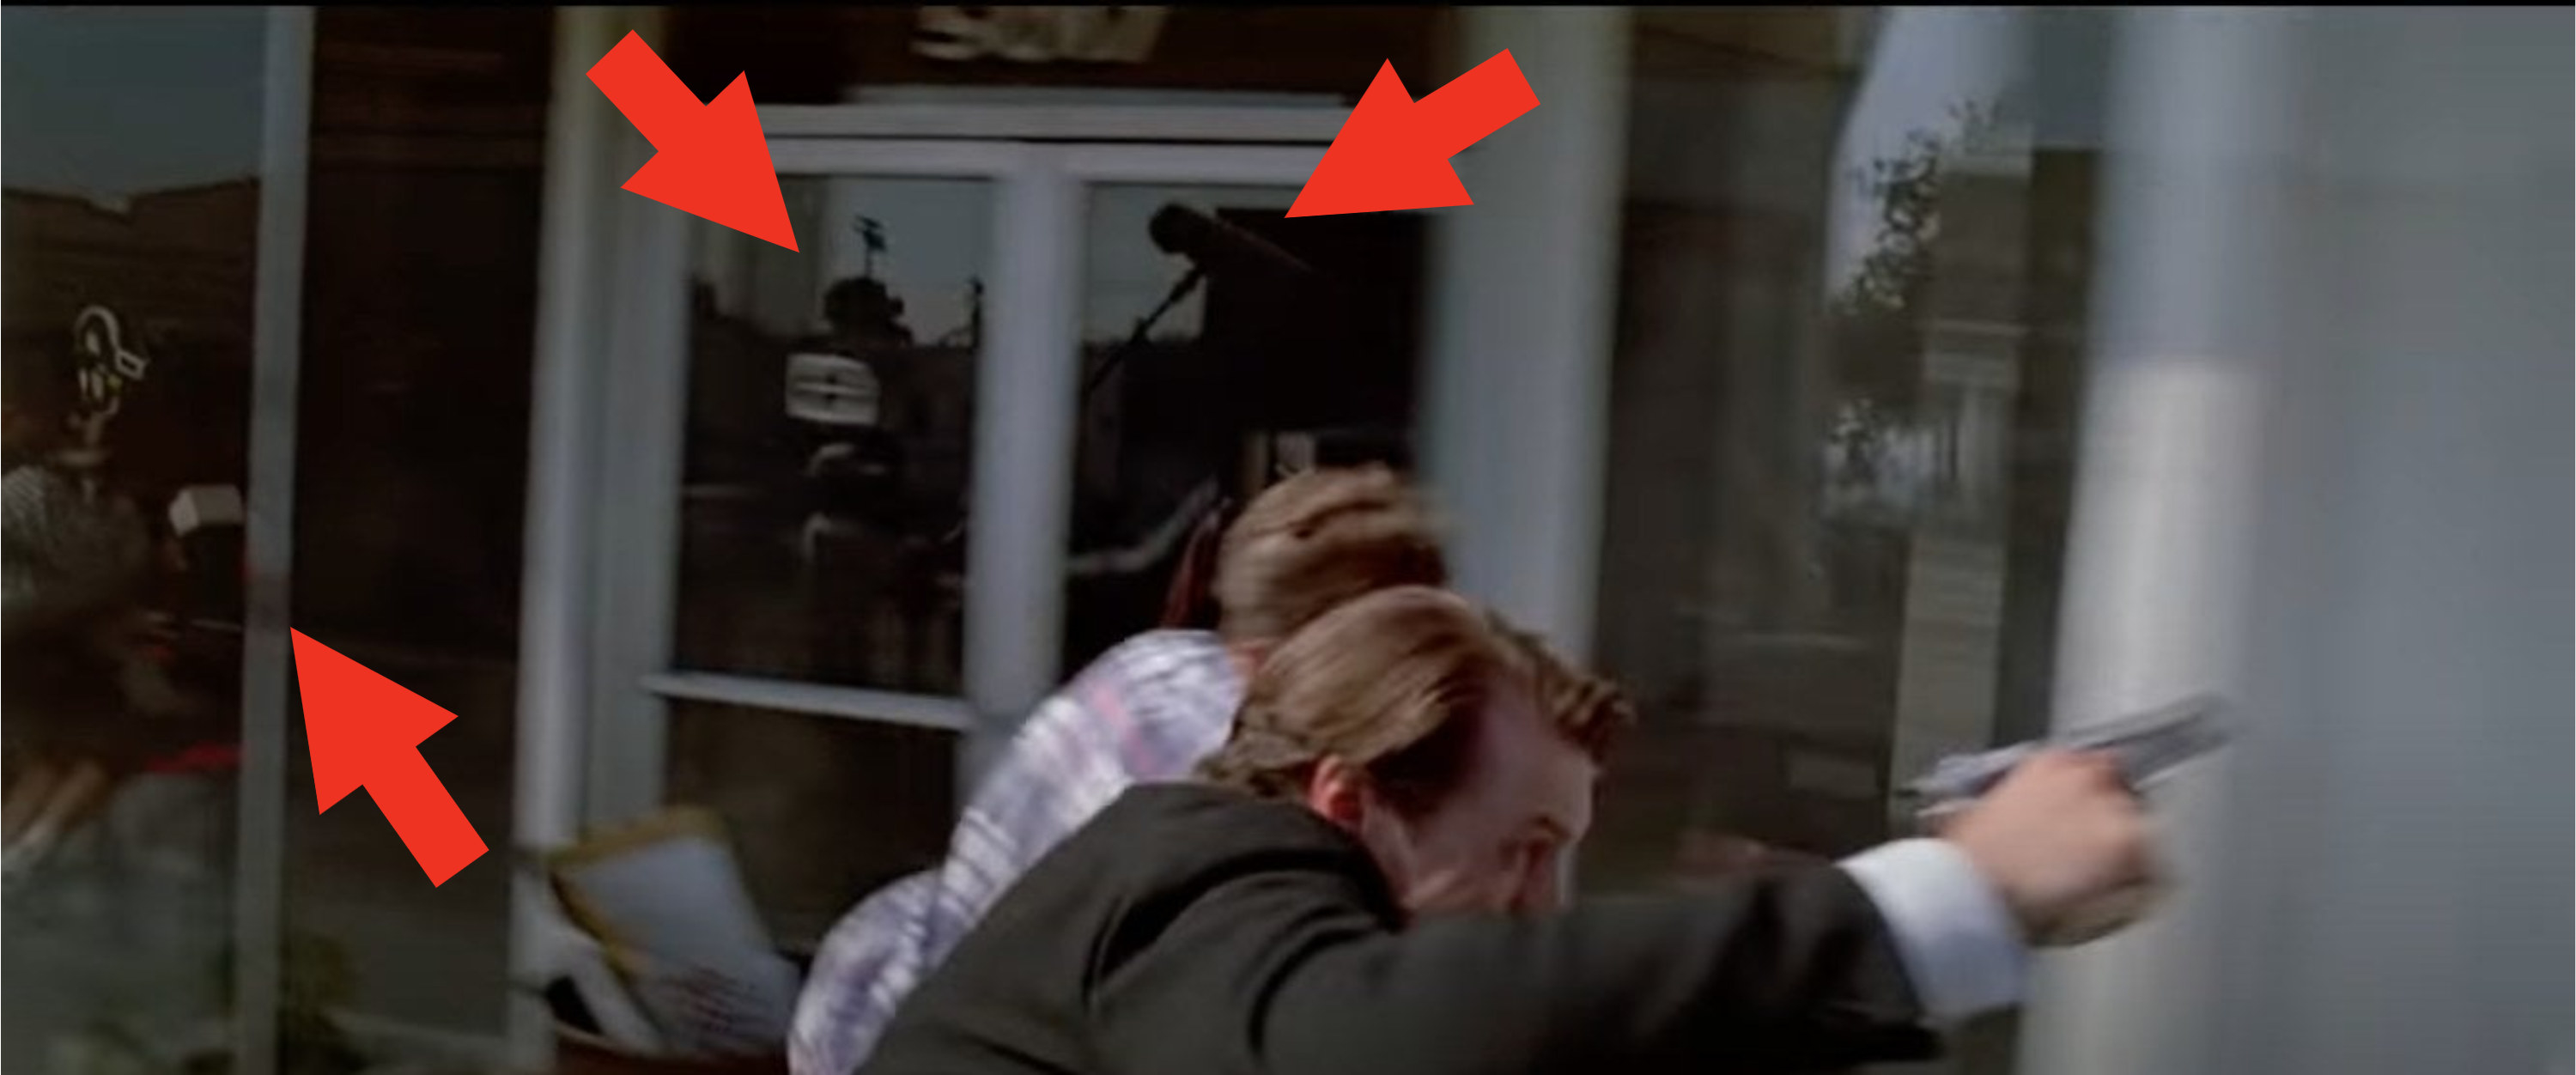 Camera crew and boom mic operator spotted in Reservoir Dogs scene